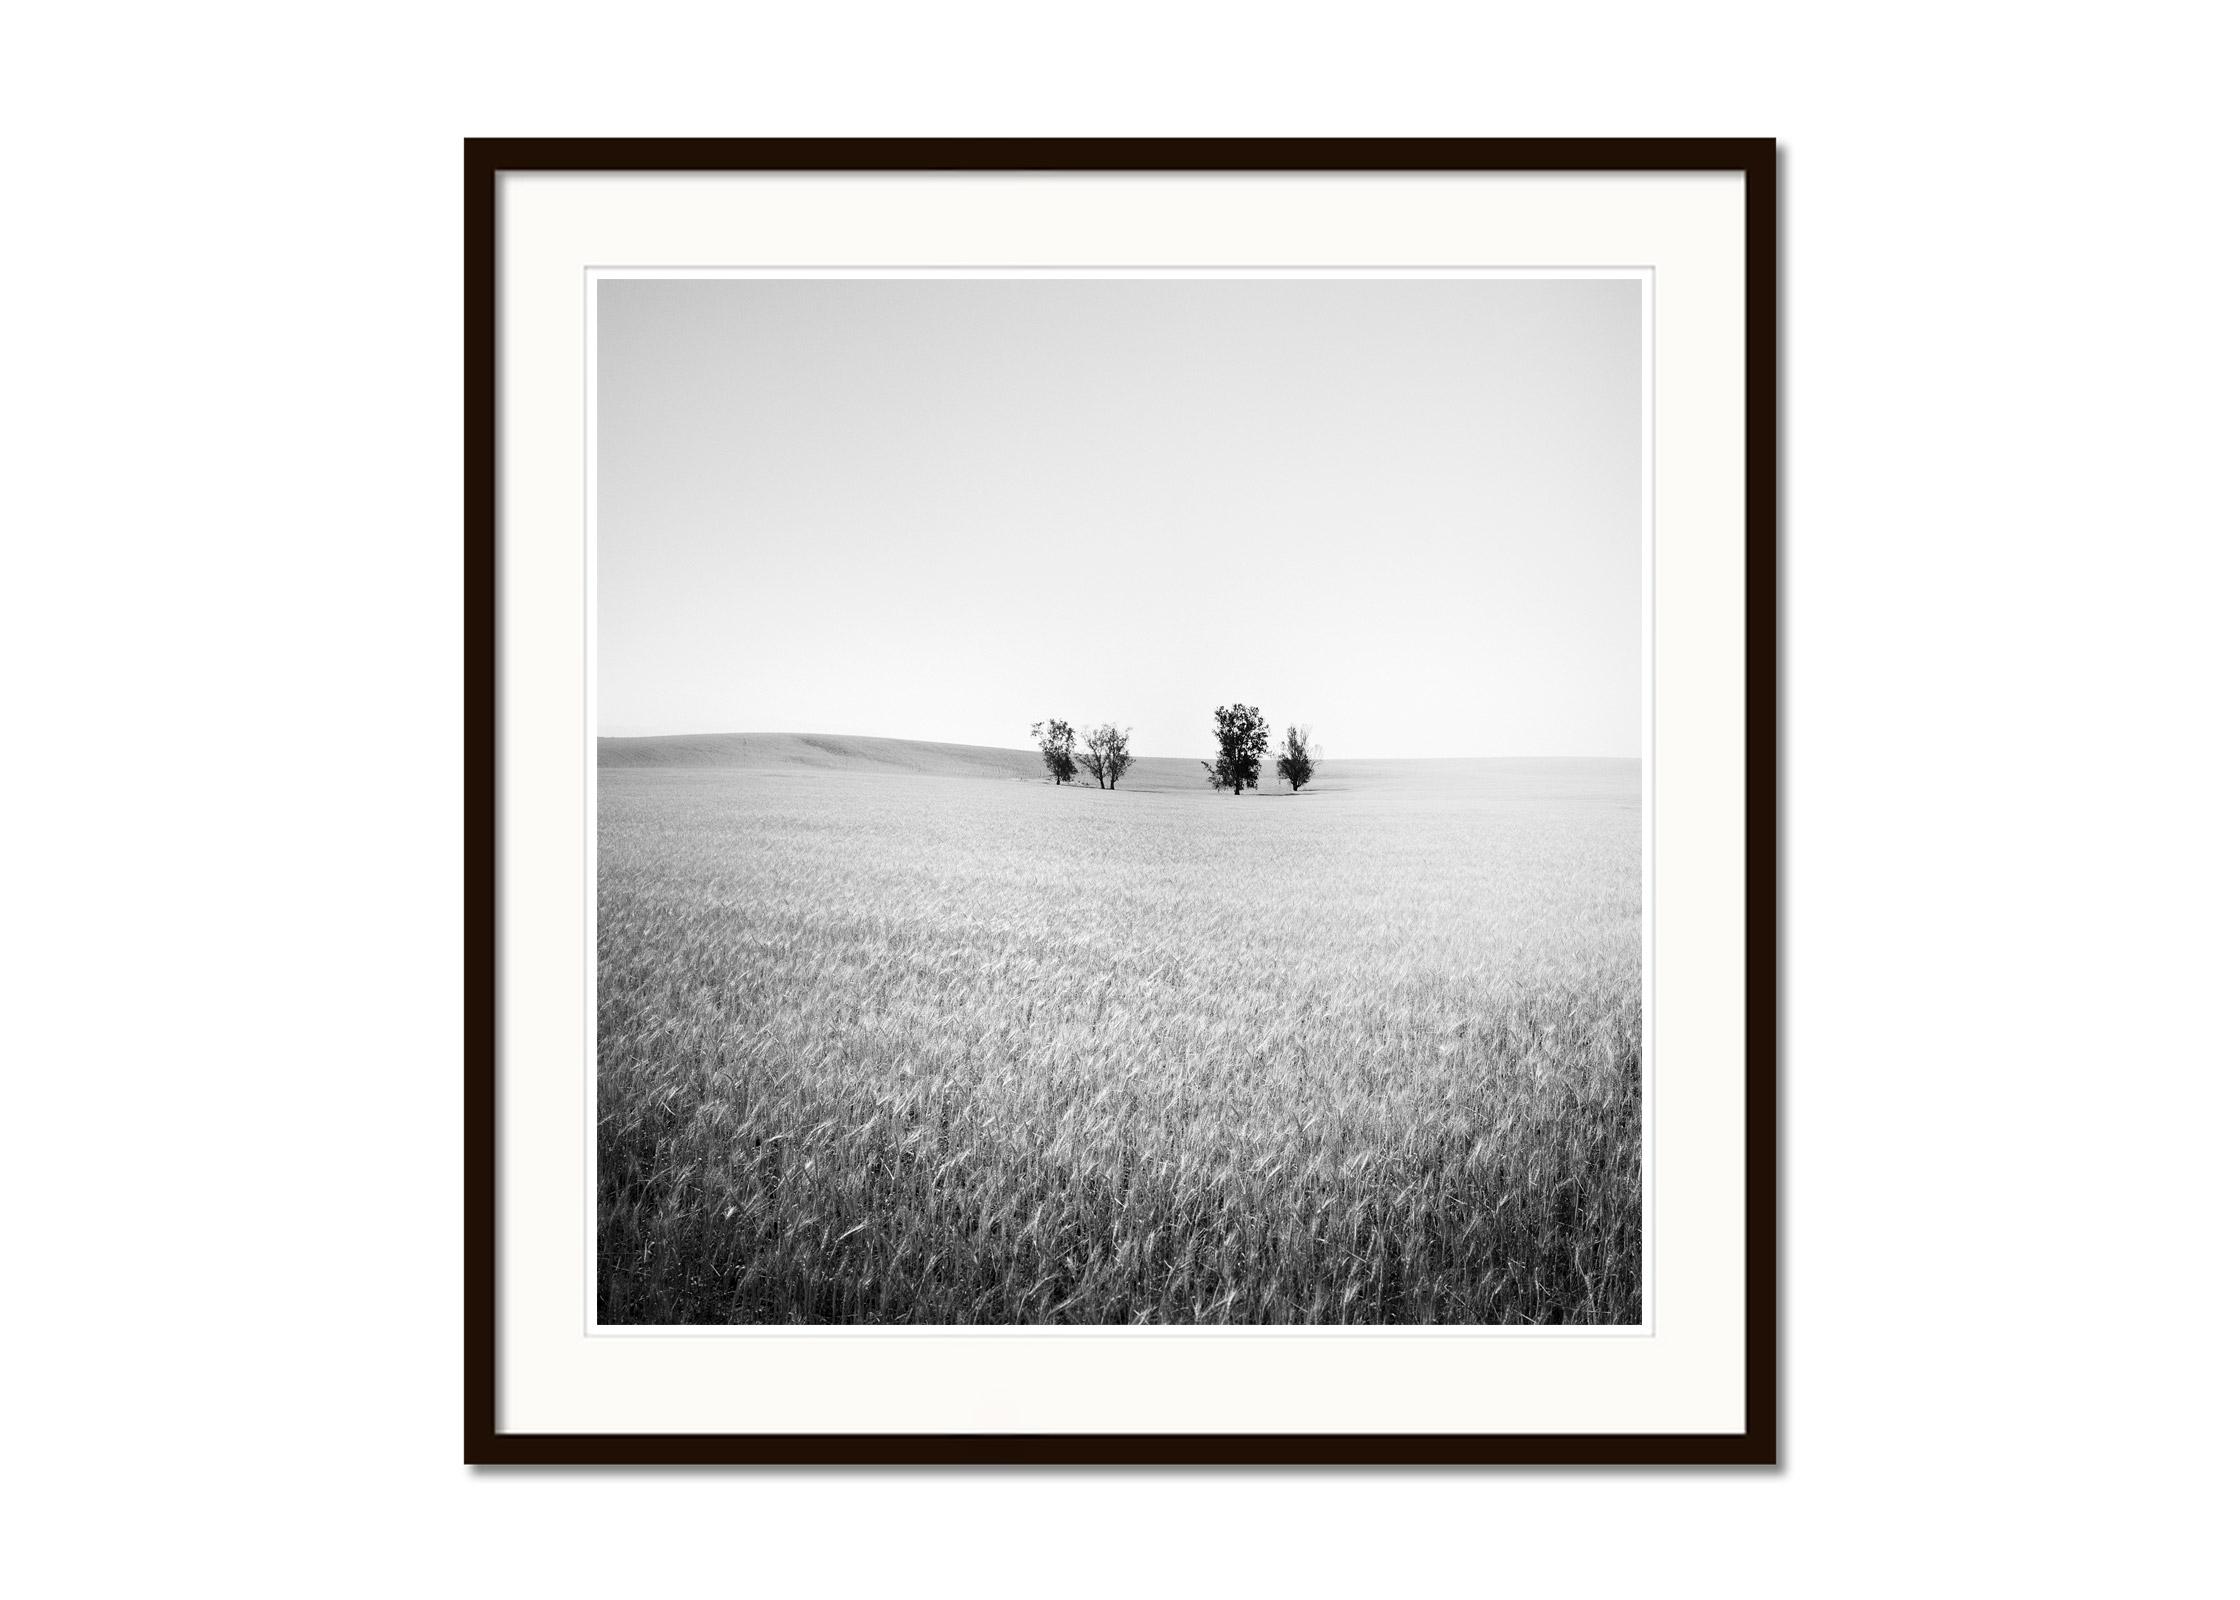 Trees in wheat field, California, USA, black and white art landscape photography - Gray Landscape Photograph by Gerald Berghammer